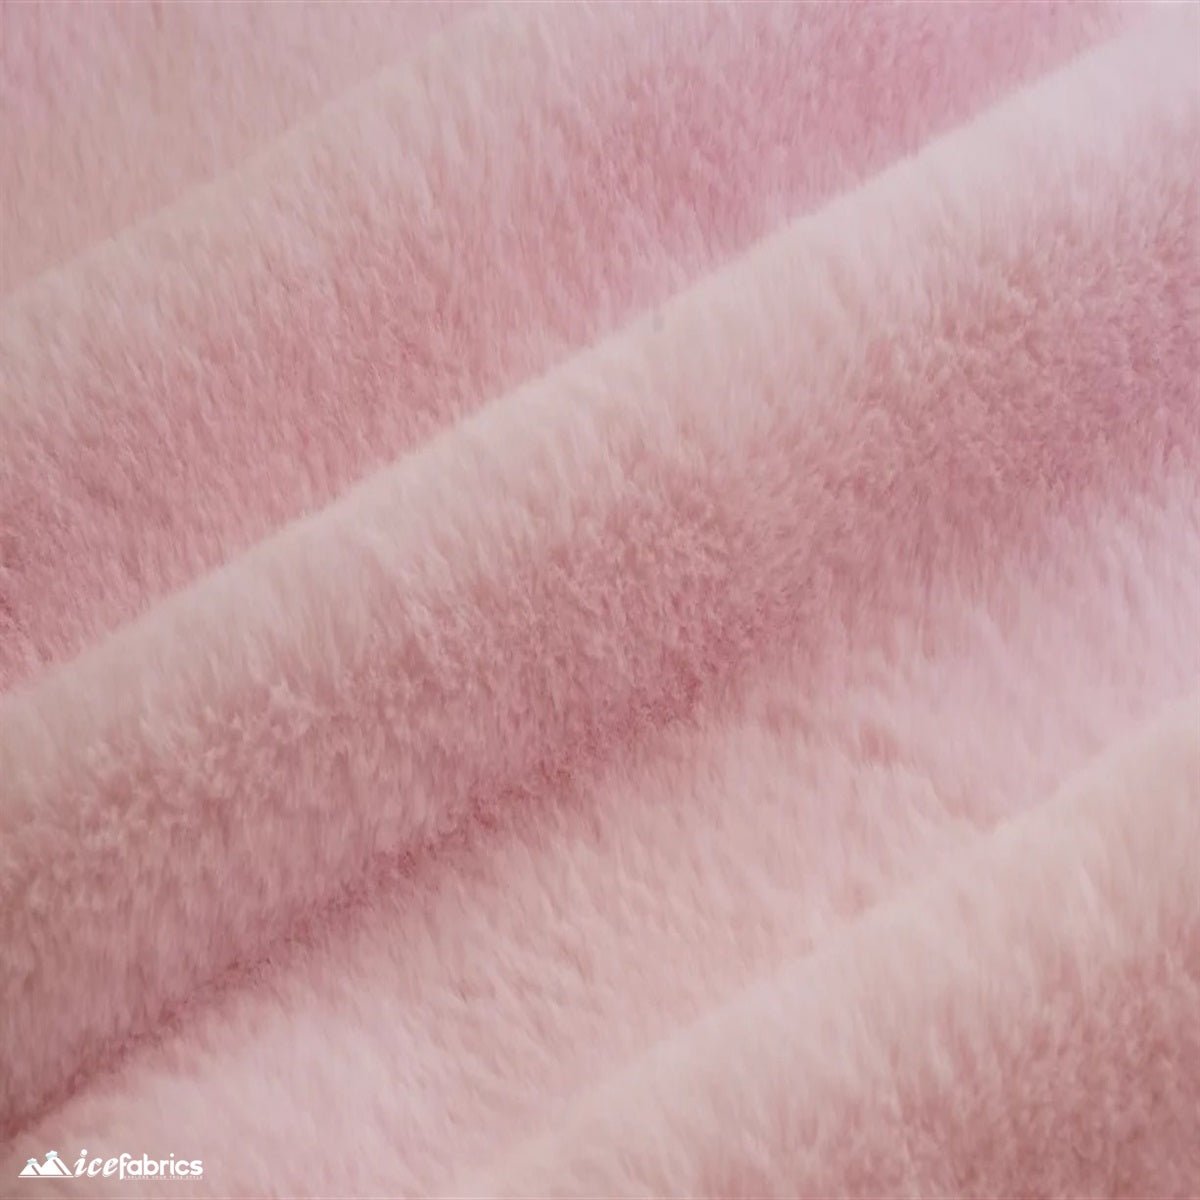 Bunny Thick Faux Fur Minky Fabric / Short Pile / Super SoftICE FABRICSICE FABRICSPinkBy The Yard (60 inches Wide)Bunny Thick Faux Fur Minky Fabric / Short Pile / Super Soft ICE FABRICS Pink